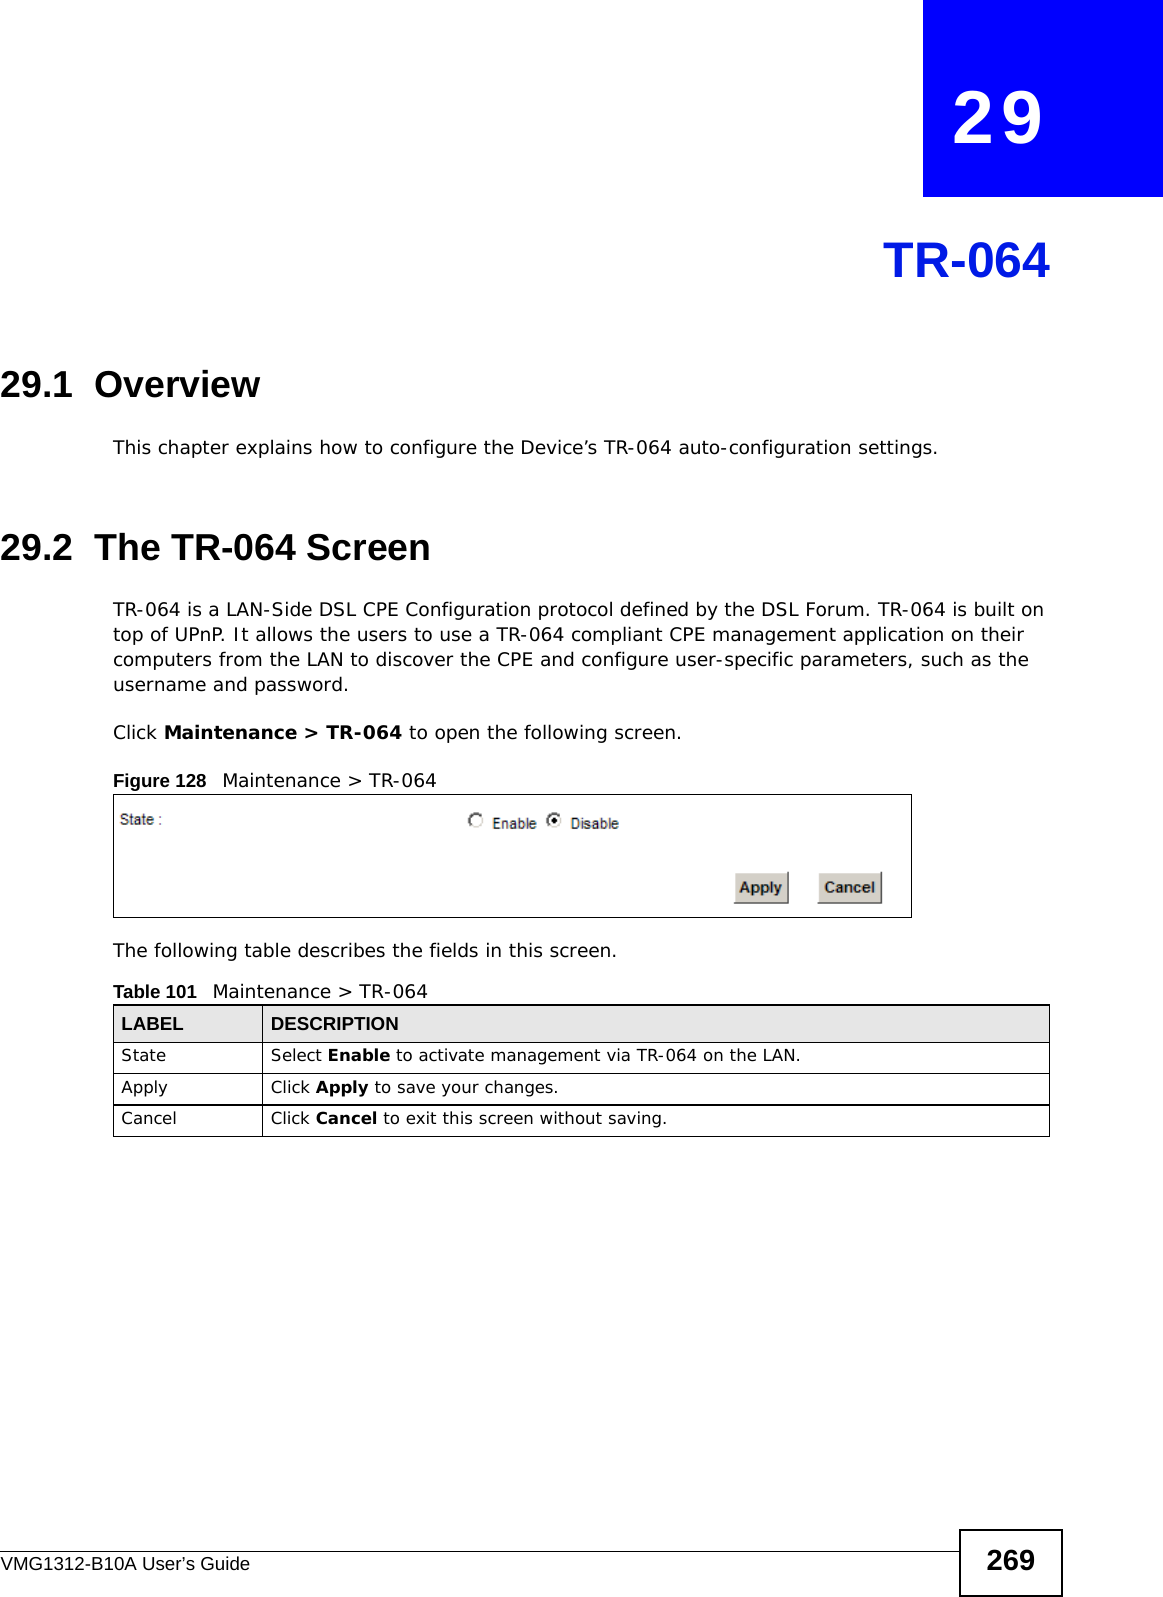 VMG1312-B10A User’s Guide 269CHAPTER   29TR-06429.1  OverviewThis chapter explains how to configure the Device’s TR-064 auto-configuration settings.29.2  The TR-064 ScreenTR-064 is a LAN-Side DSL CPE Configuration protocol defined by the DSL Forum. TR-064 is built on top of UPnP. It allows the users to use a TR-064 compliant CPE management application on their computers from the LAN to discover the CPE and configure user-specific parameters, such as the username and password.Click Maintenance &gt; TR-064 to open the following screen. Figure 128   Maintenance &gt; TR-064 The following table describes the fields in this screen. Table 101   Maintenance &gt; TR-064LABEL DESCRIPTIONState Select Enable to activate management via TR-064 on the LAN.Apply Click Apply to save your changes.Cancel Click Cancel to exit this screen without saving.